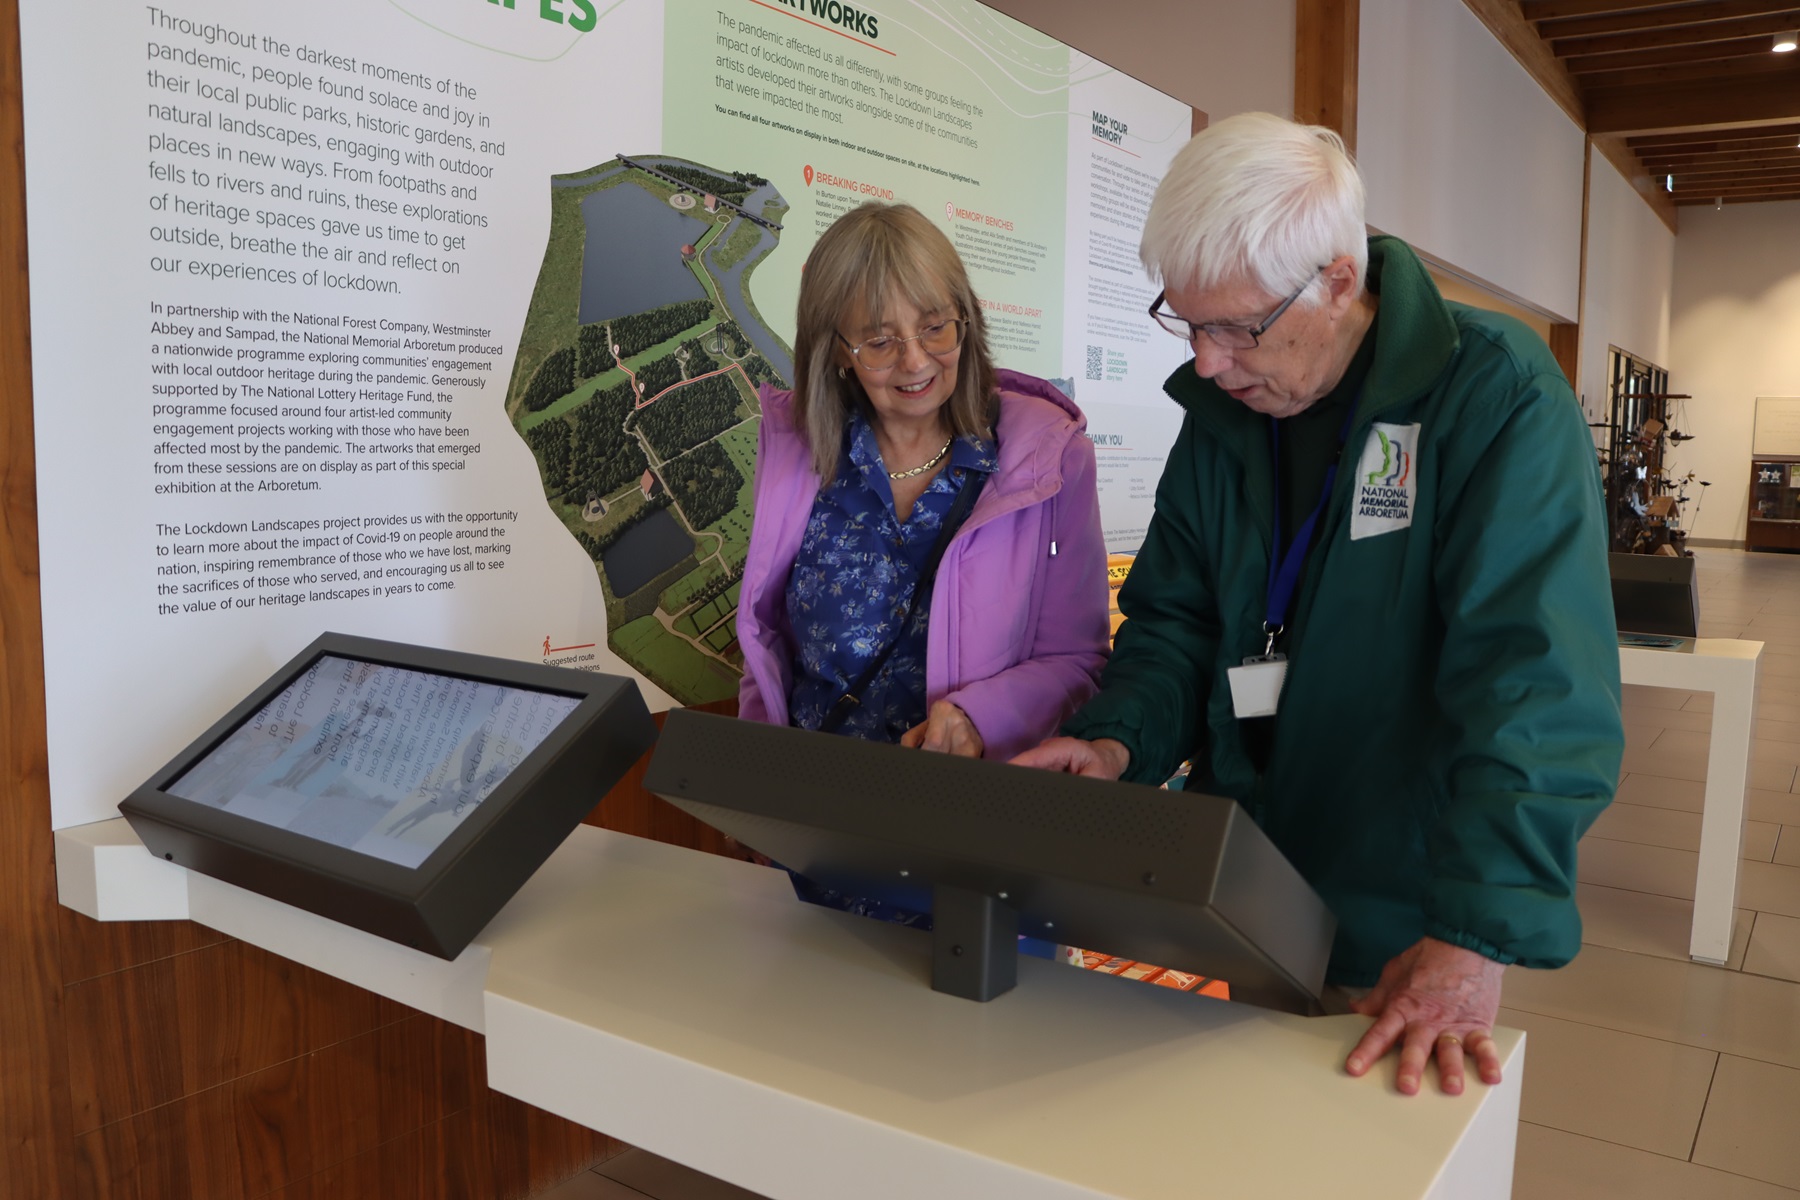 Visitors using the Arboretum Kiosk to find a memorial